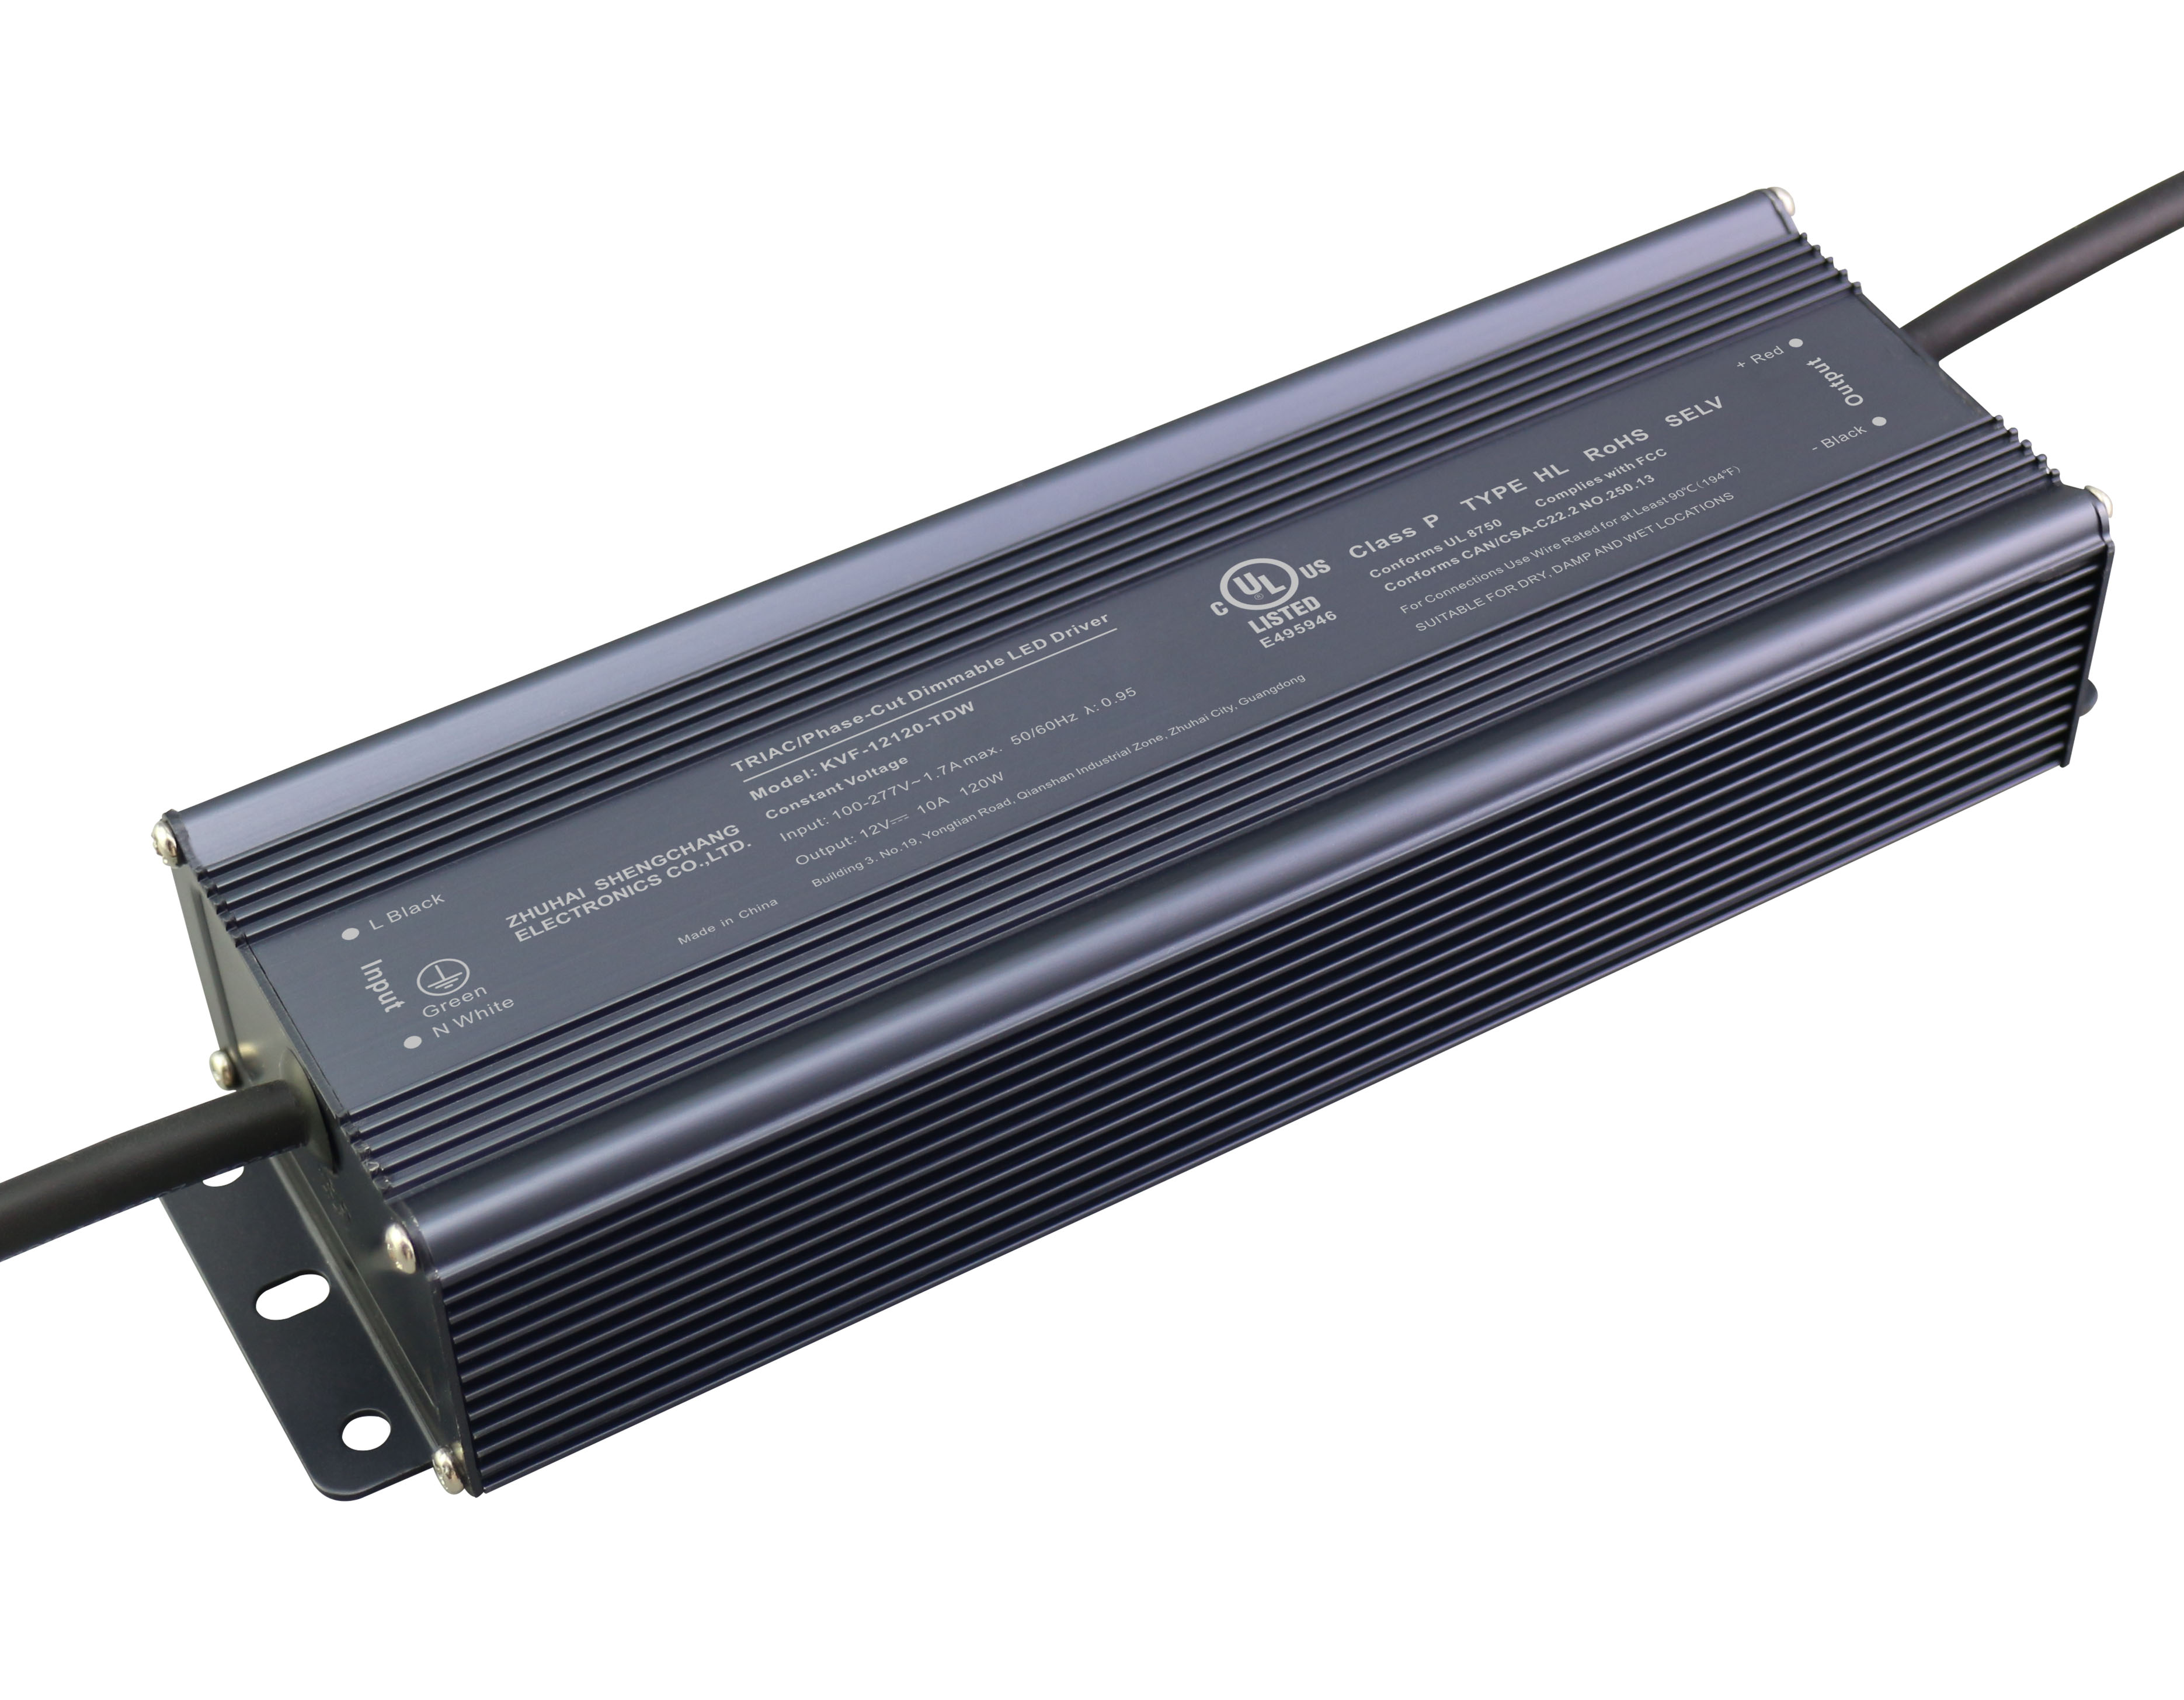 KVF-TDW Series 120W Constant Voltage Triac Dimmable LED driver